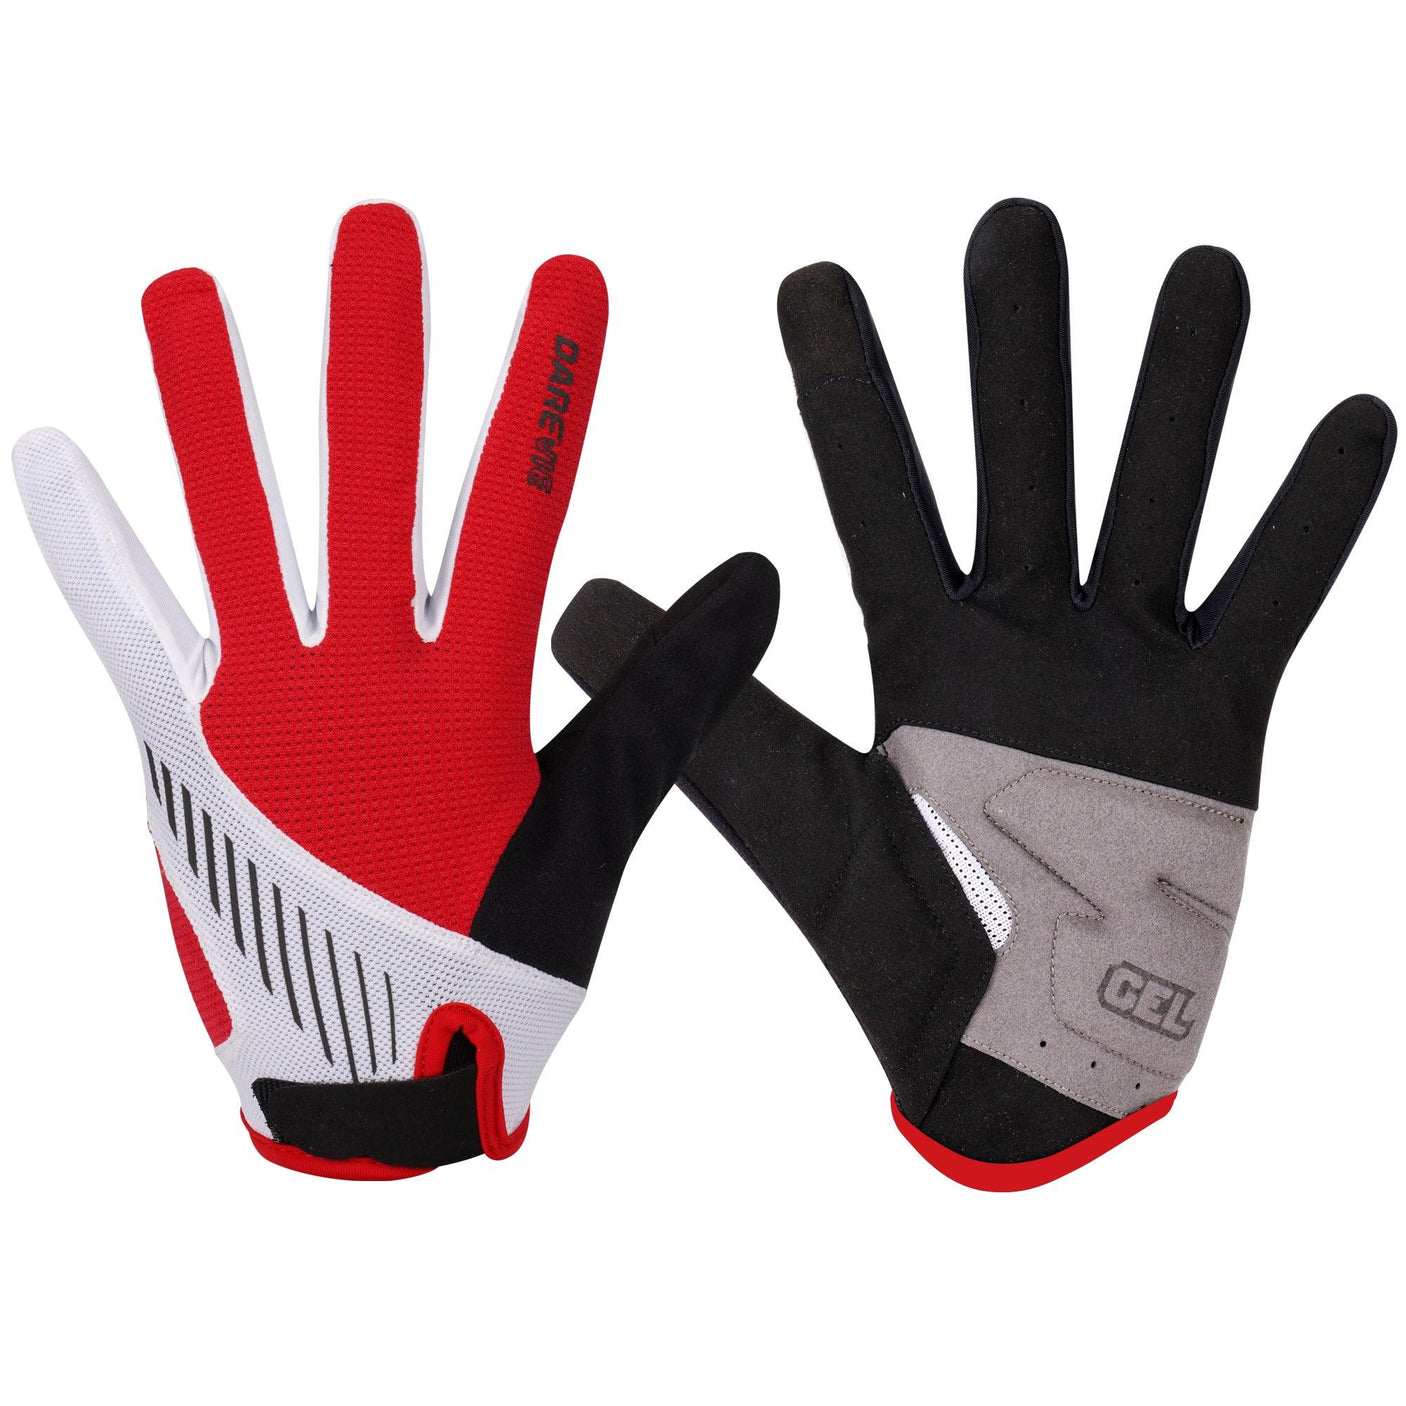 SWIFTSHIELD FULL FINGER CYCLING GLOVES-Red- - Darevie Shop